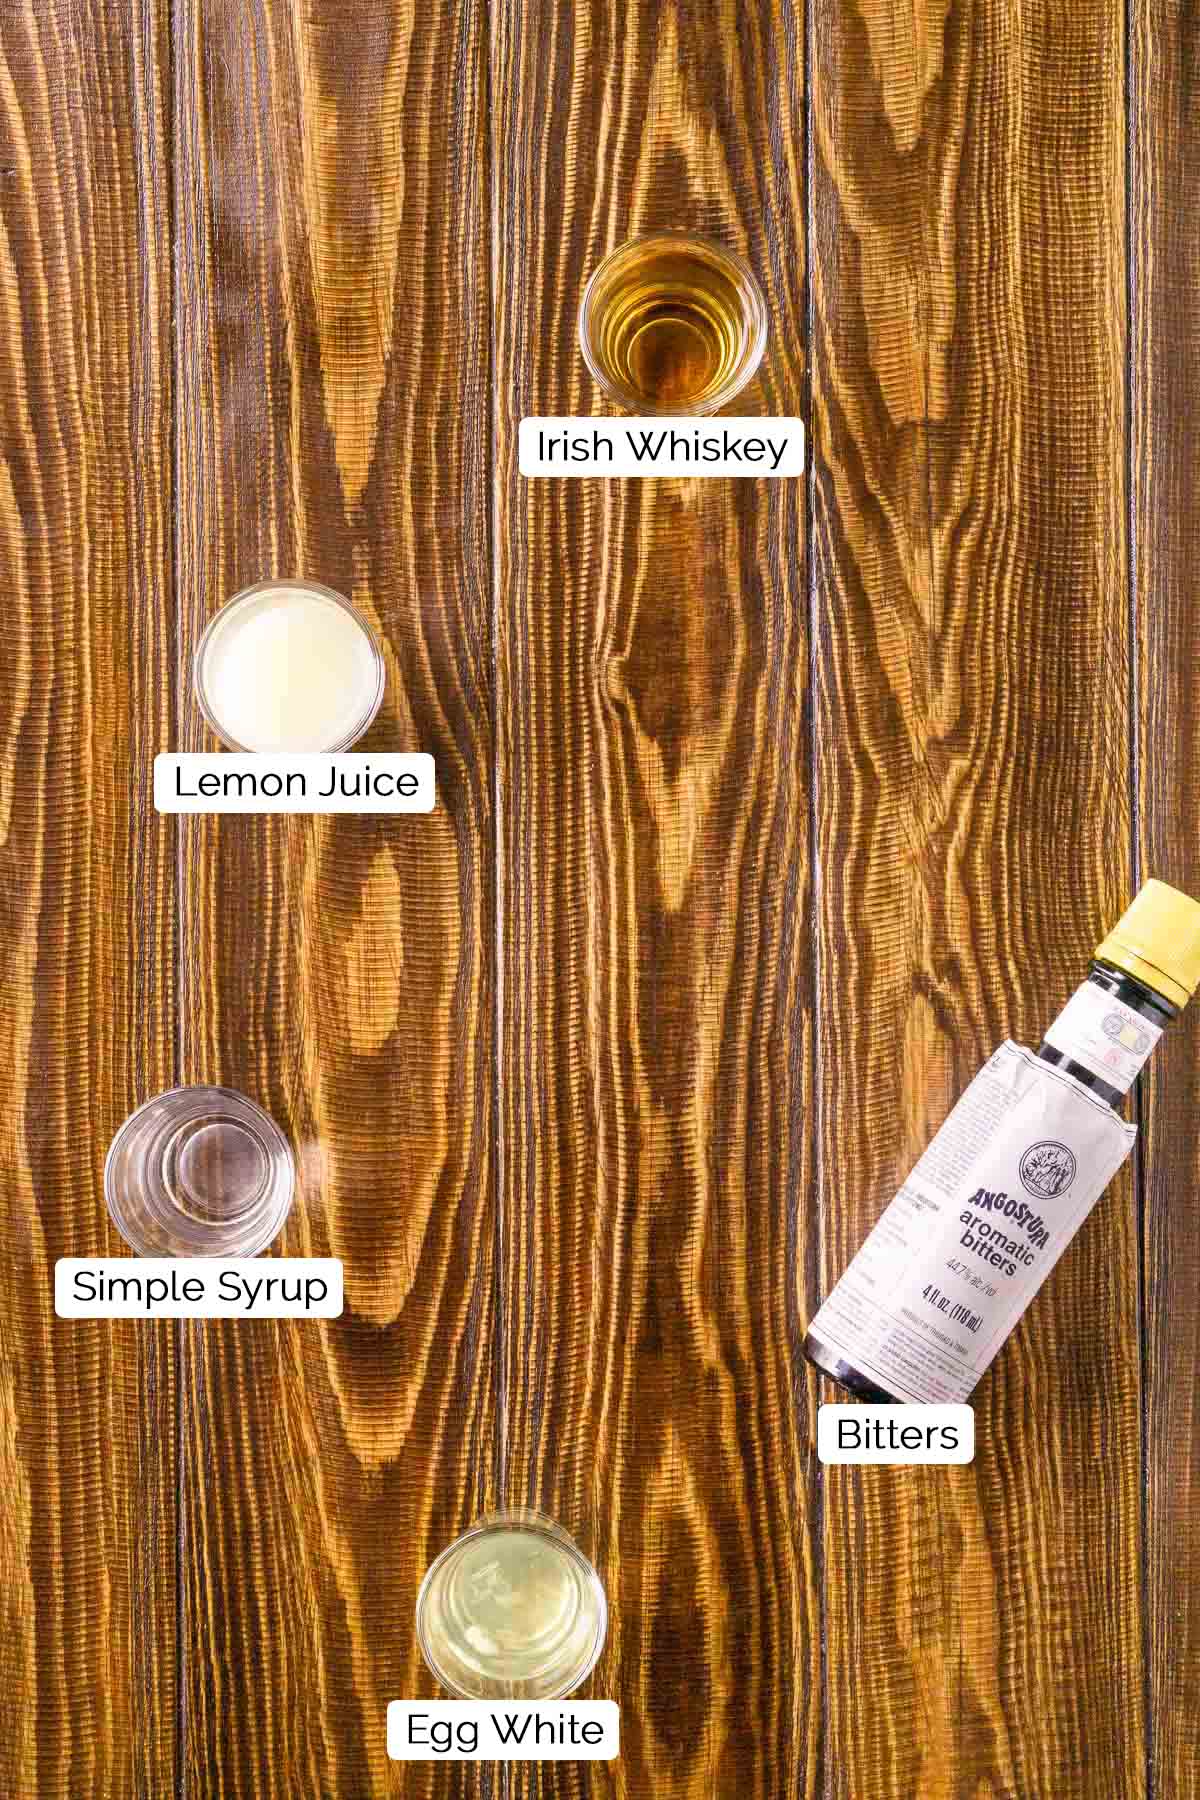 The drink ingredients in shot glasses with black and white labels underneath the items on a brown wooden surface.